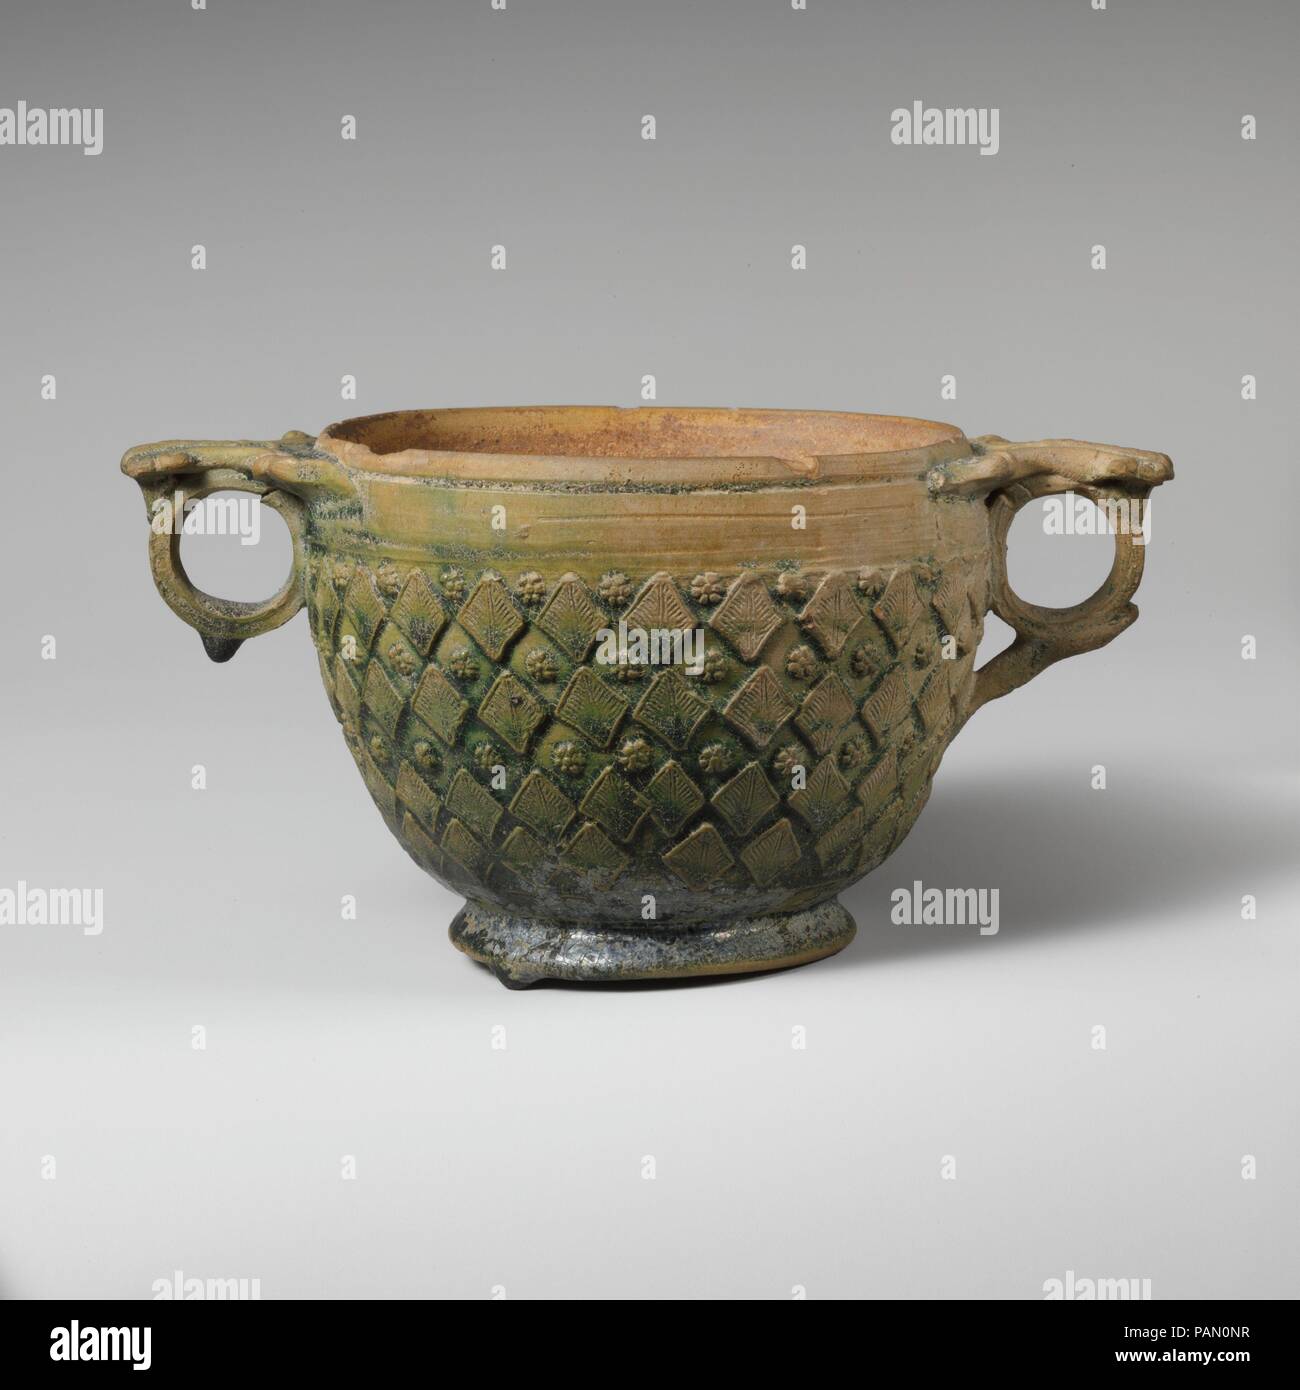 Terracotta scyphus (drinking cup). Culture: Roman. Dimensions: H. 3 in. (7.6 cm)  diameter  3 11/16 in. (9.4 cm). Date: 1st half of 1st century A.D..  Green-glazed with leaf decoration and rosettes. Museum: Metropolitan Museum of Art, New York, USA. Stock Photo